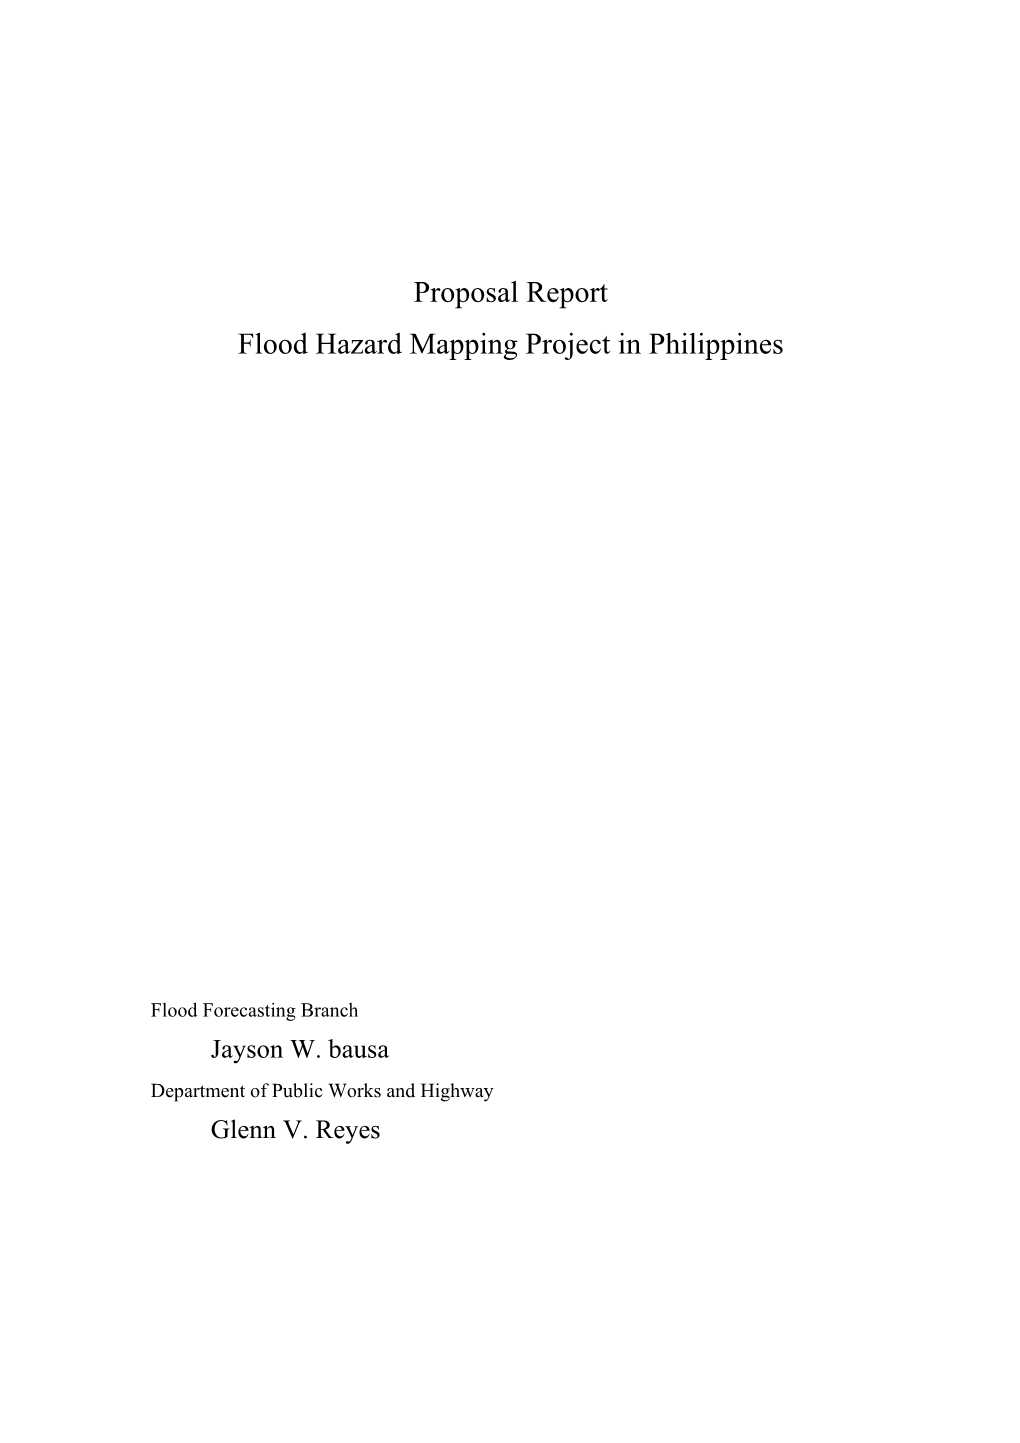 Proposal Report Flood Hazard Mapping Project in Philippines